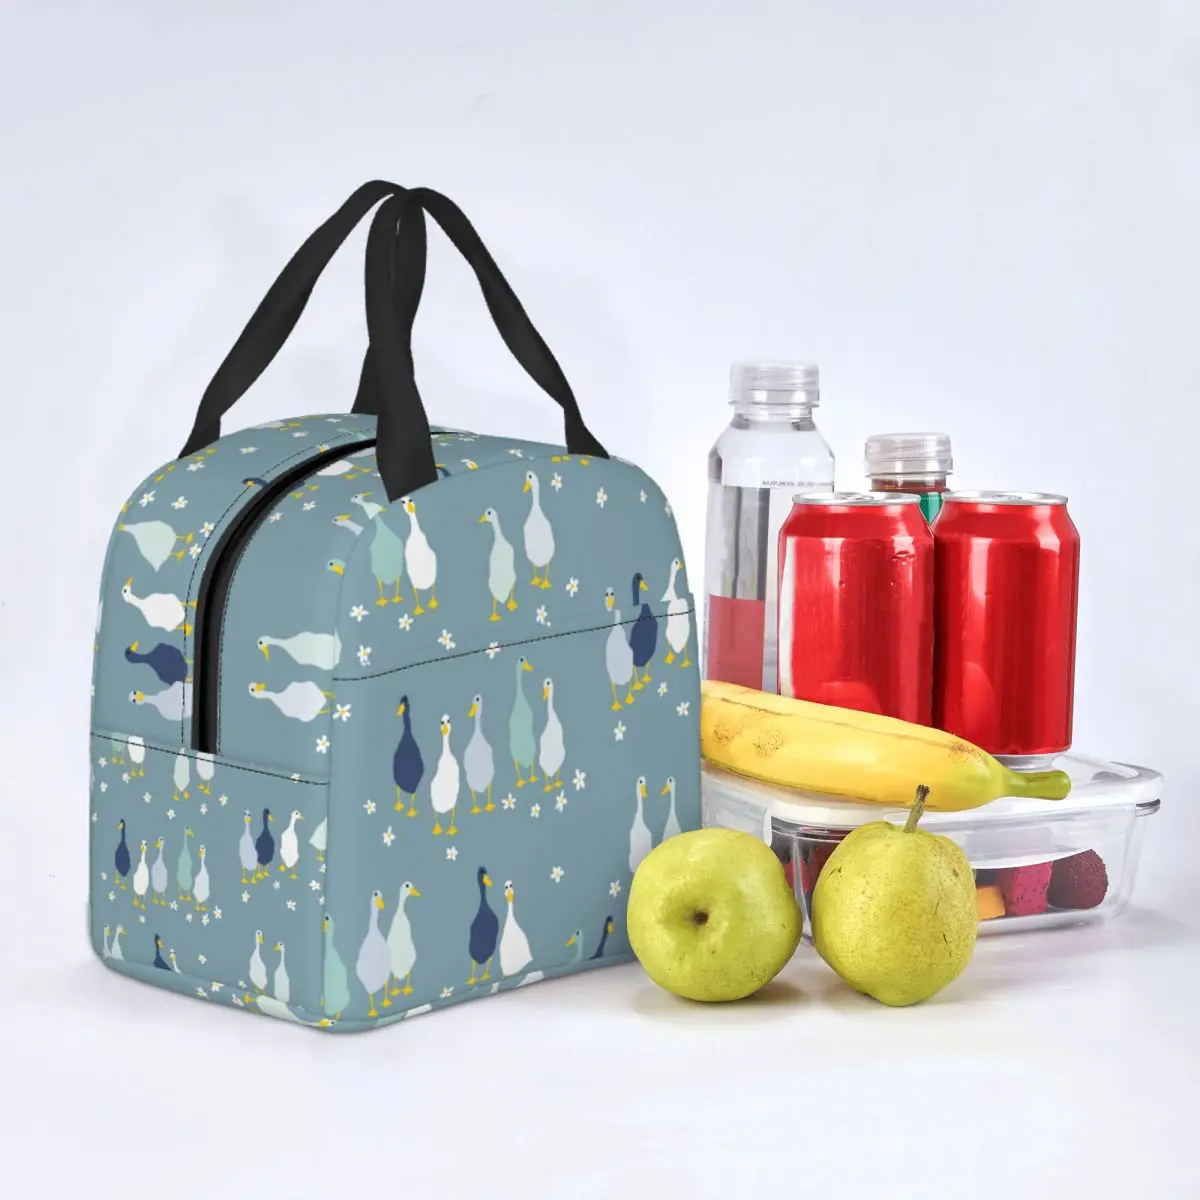 

Walking Gooses Lunch Bag Waterproof Insulated Canvas Cooler Thermal Picnic Tote for Women Kids